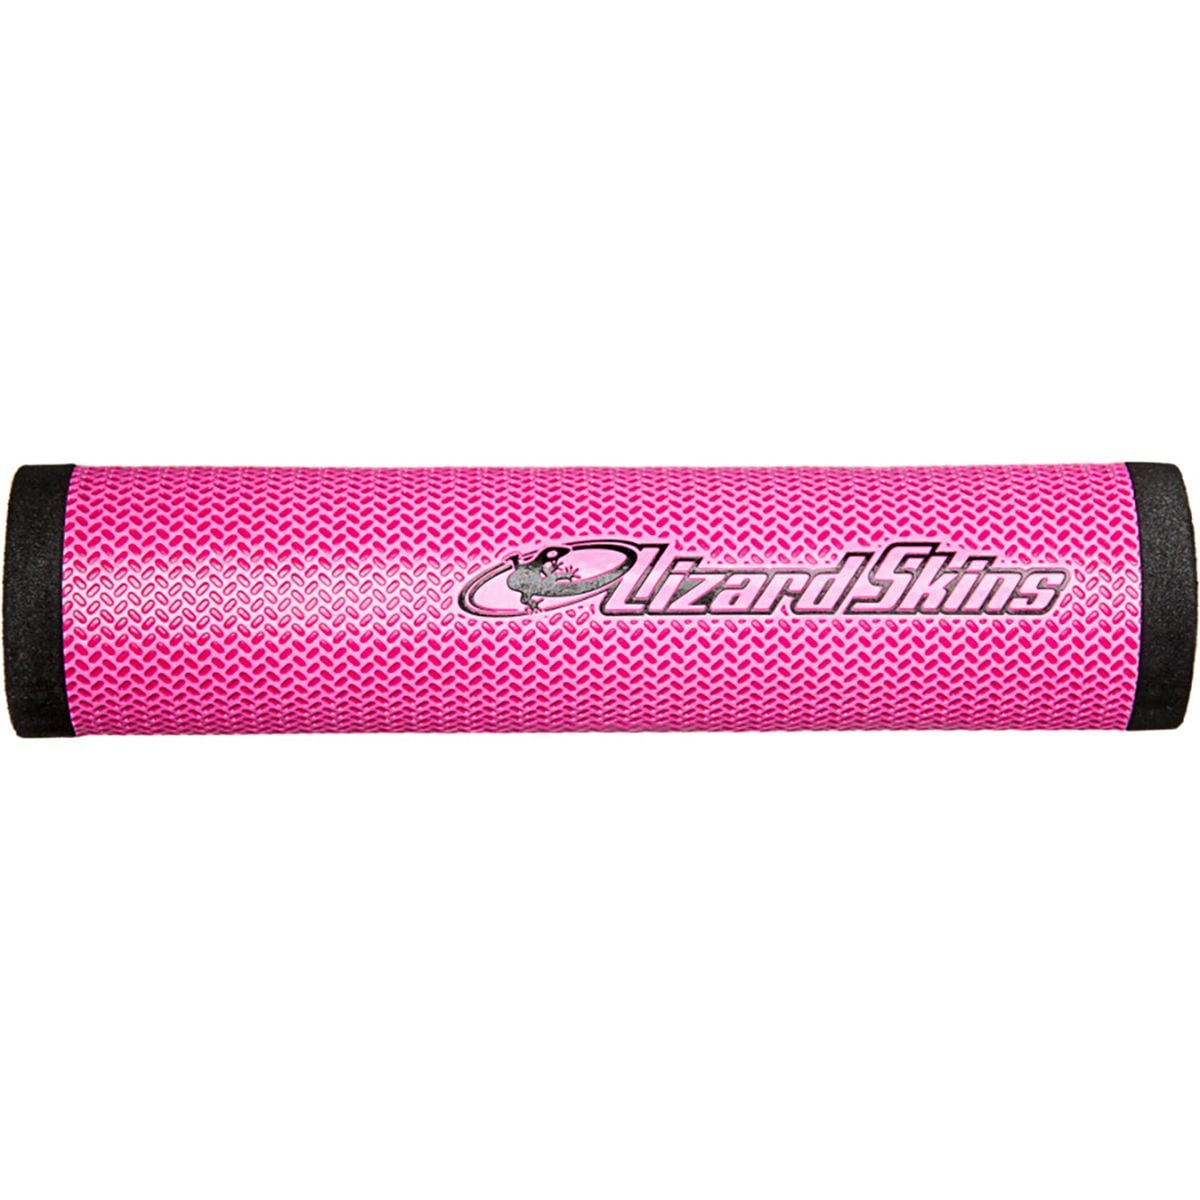 Lizard Skins DSP Grip 32.3mm Pink, One Size